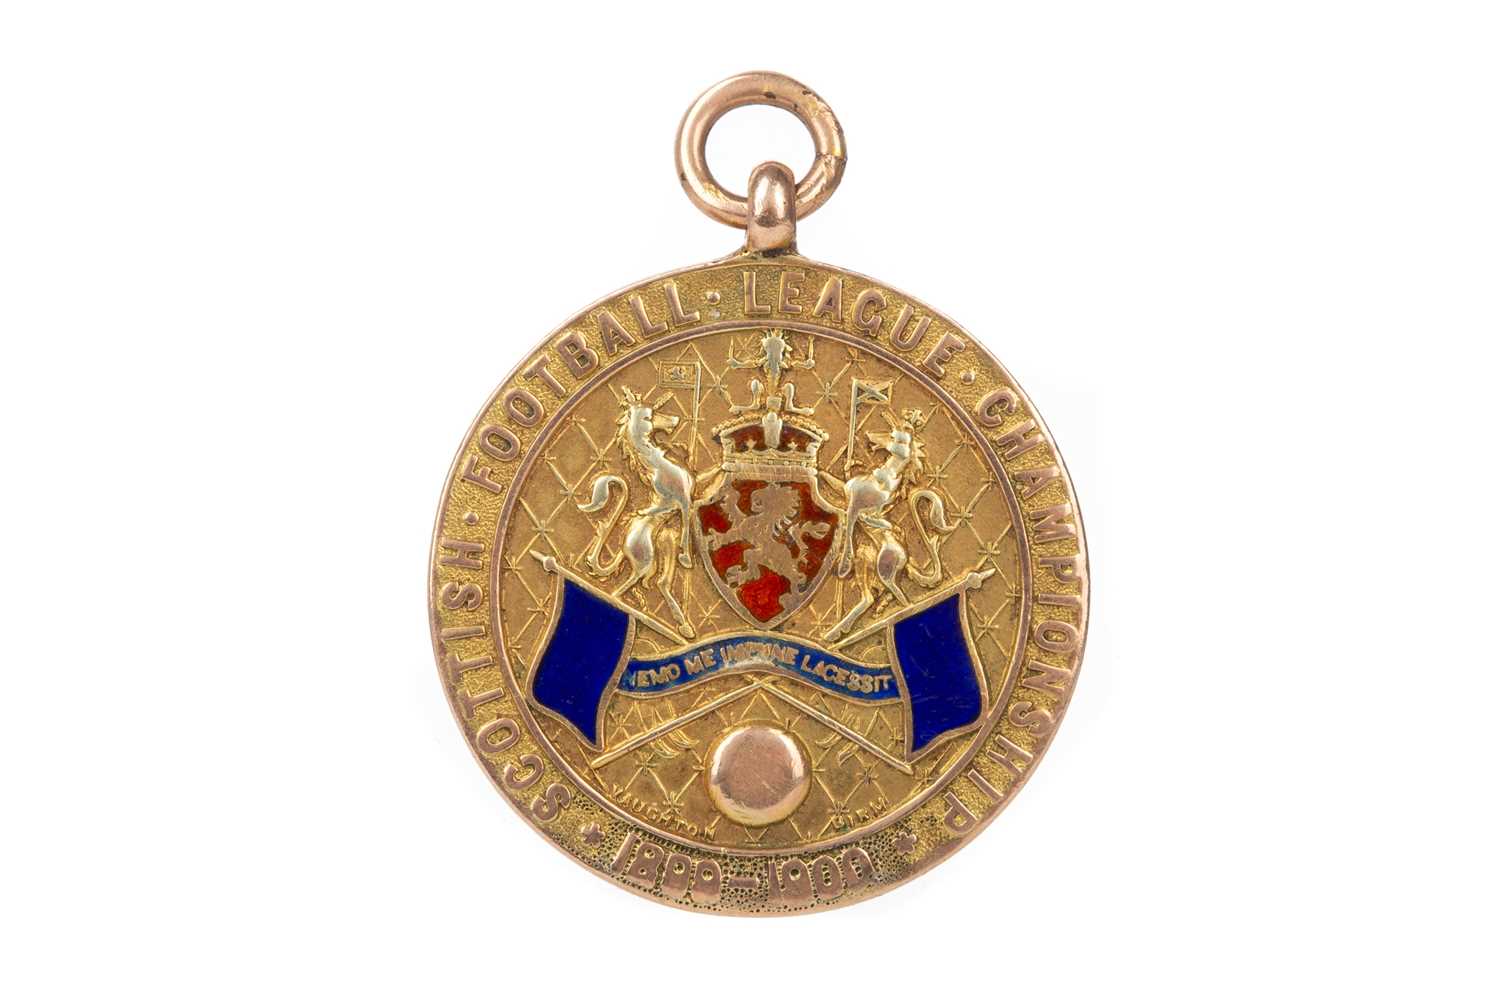 NEIL 'NEILLY' GIBSON OF RANGERS F.C., SCOTTISH LEAGUE CHAMPIONSHIP GOLD MEDAL, 1899/1900